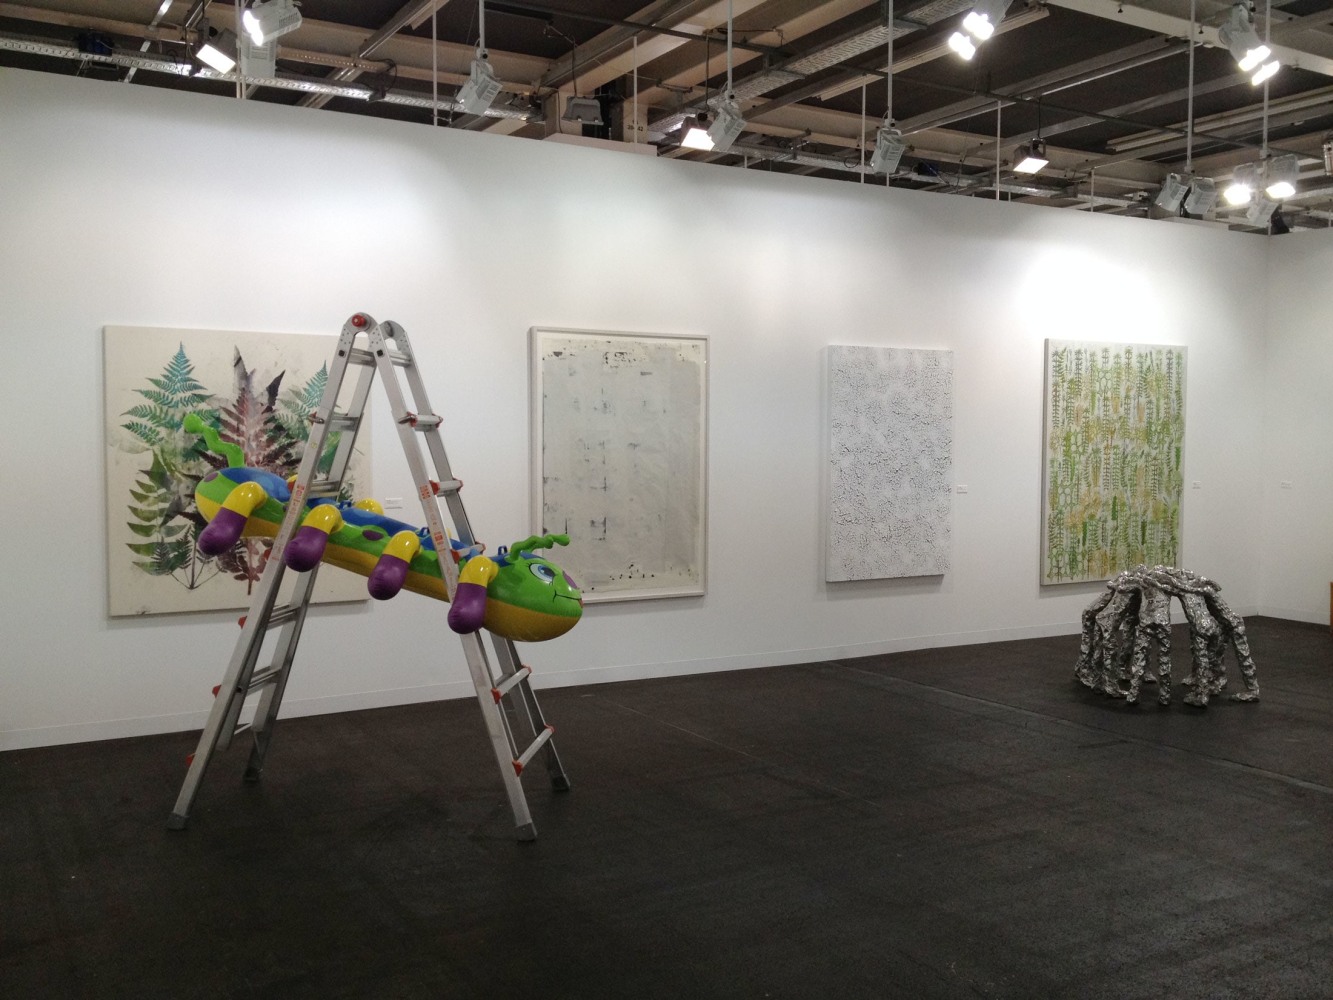 Luhring Augustine

Art Basel, Booth E13

Installation view

2014